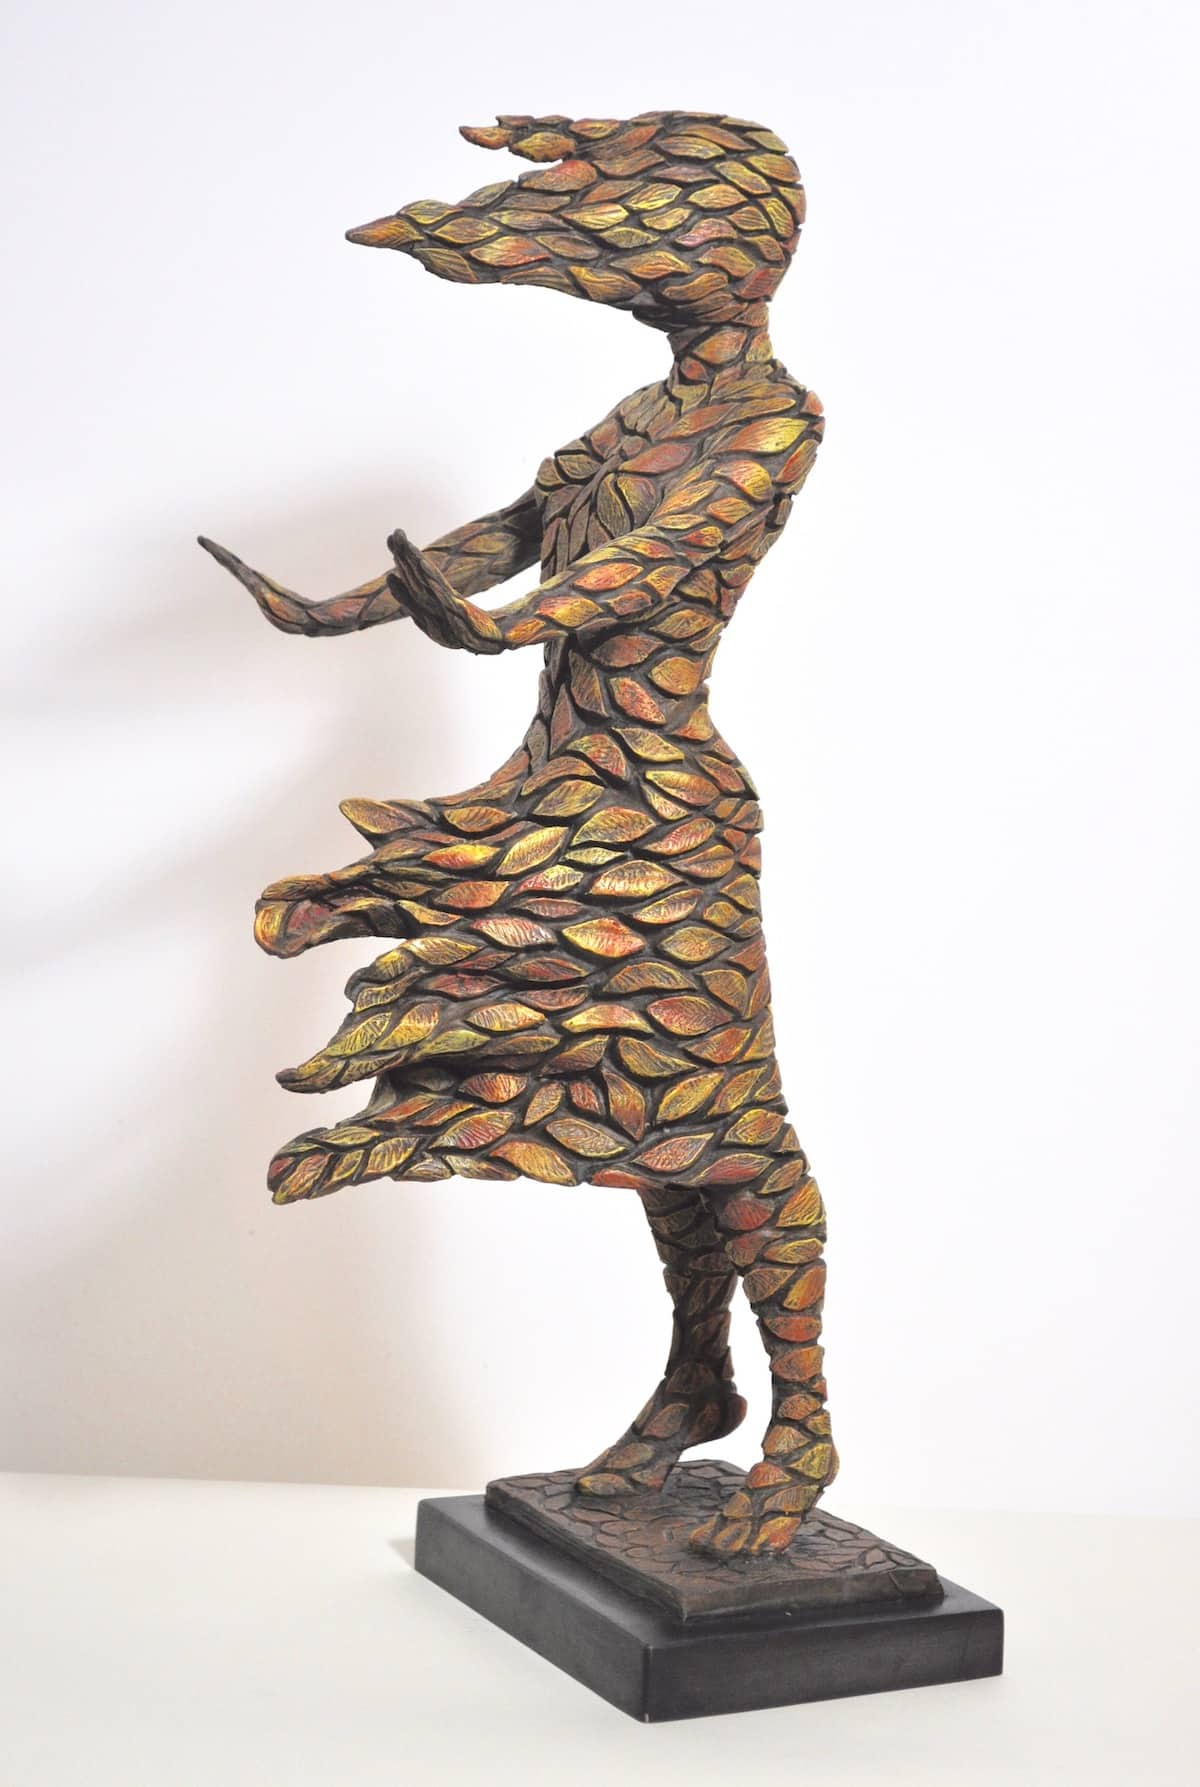 The Beauty Of Nature Fused With Elegant Human Movements In Lyrical Sculptures By Jonathan Hateley (18)